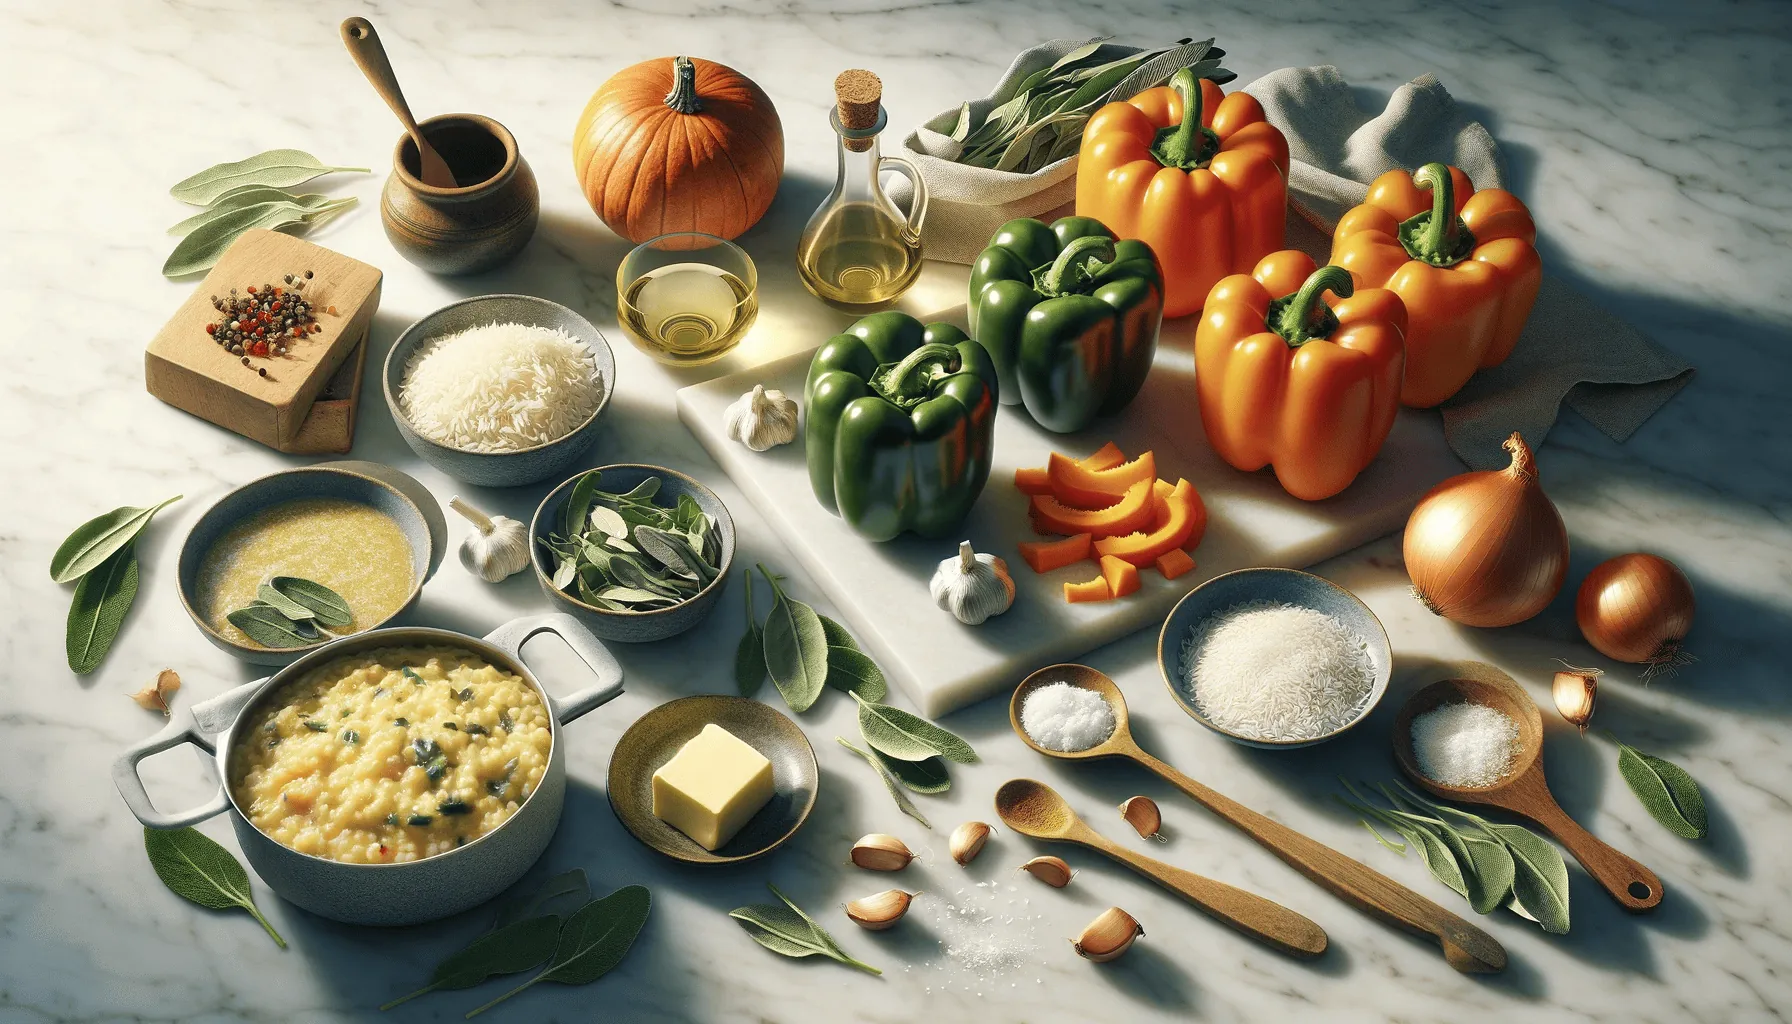 The ingredients for the dish, including bell peppers, Arborio rice, and pumpkin puree, are neatly arranged